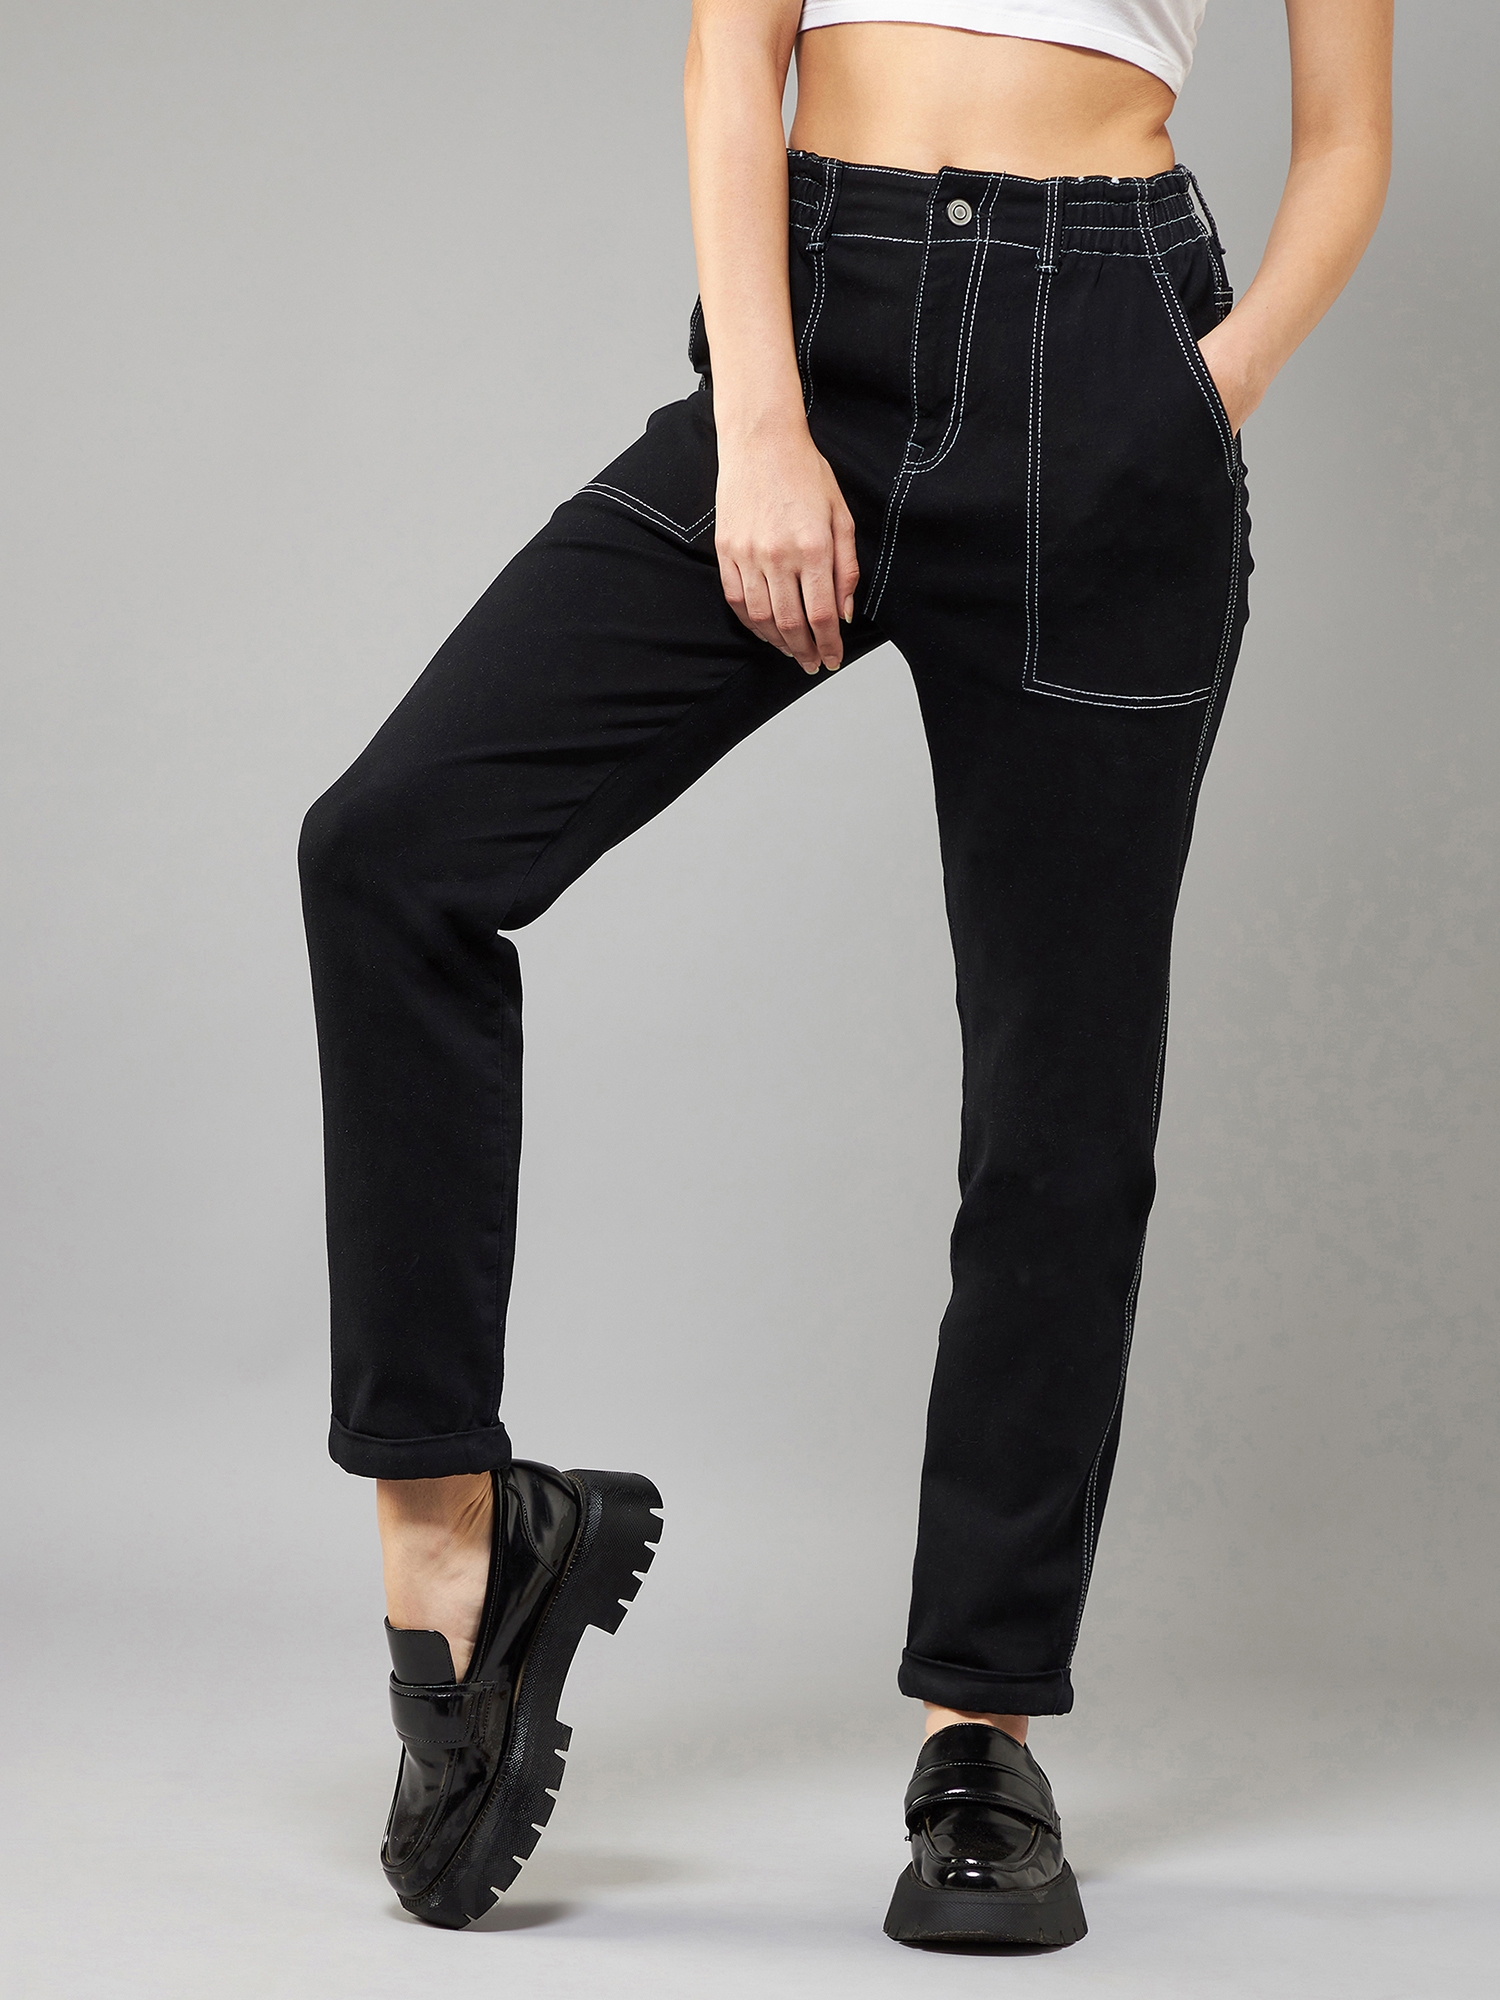 Buy Jeans for Women Online in India